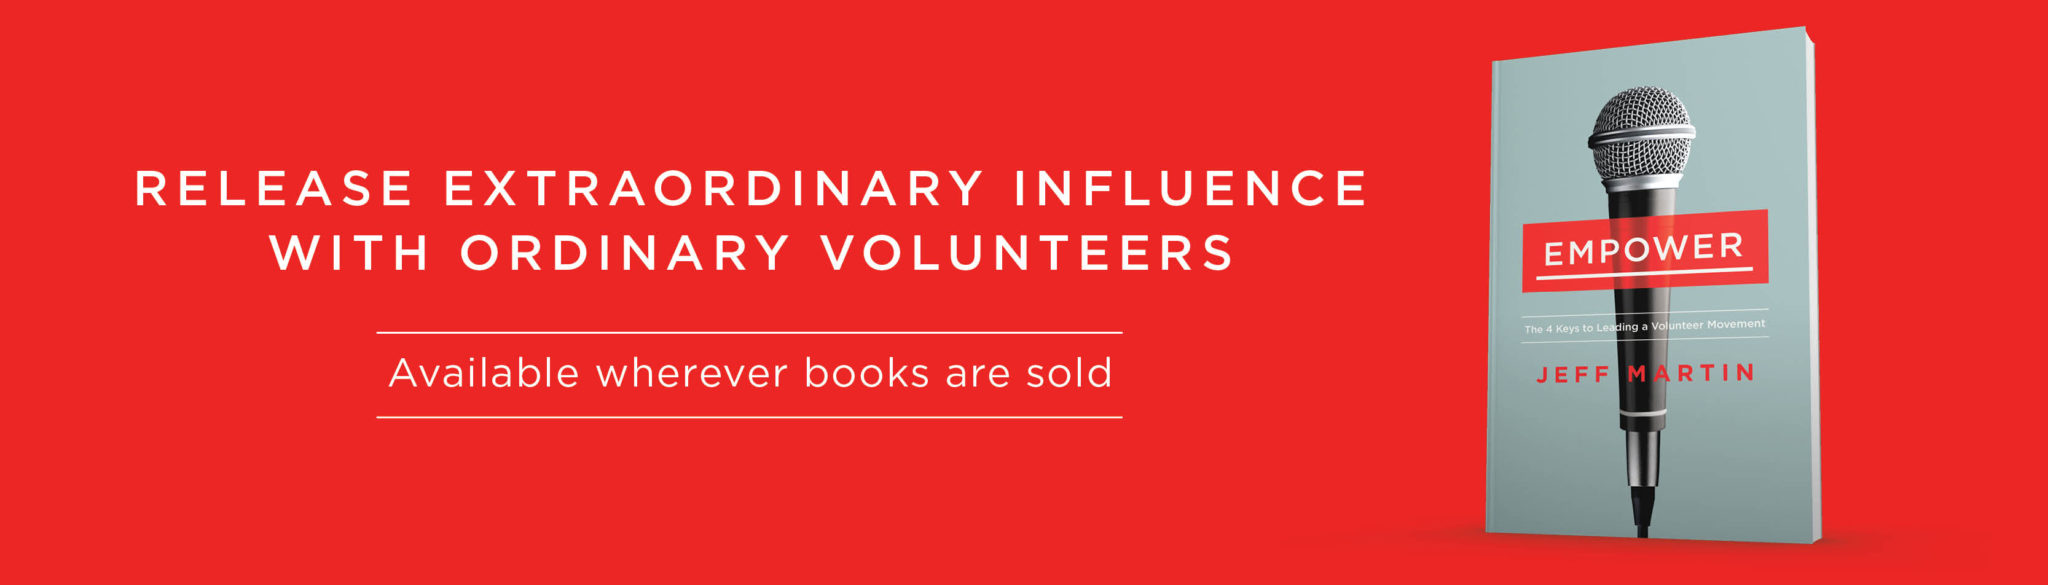 Release extraordinary influence with ordinary volunteers